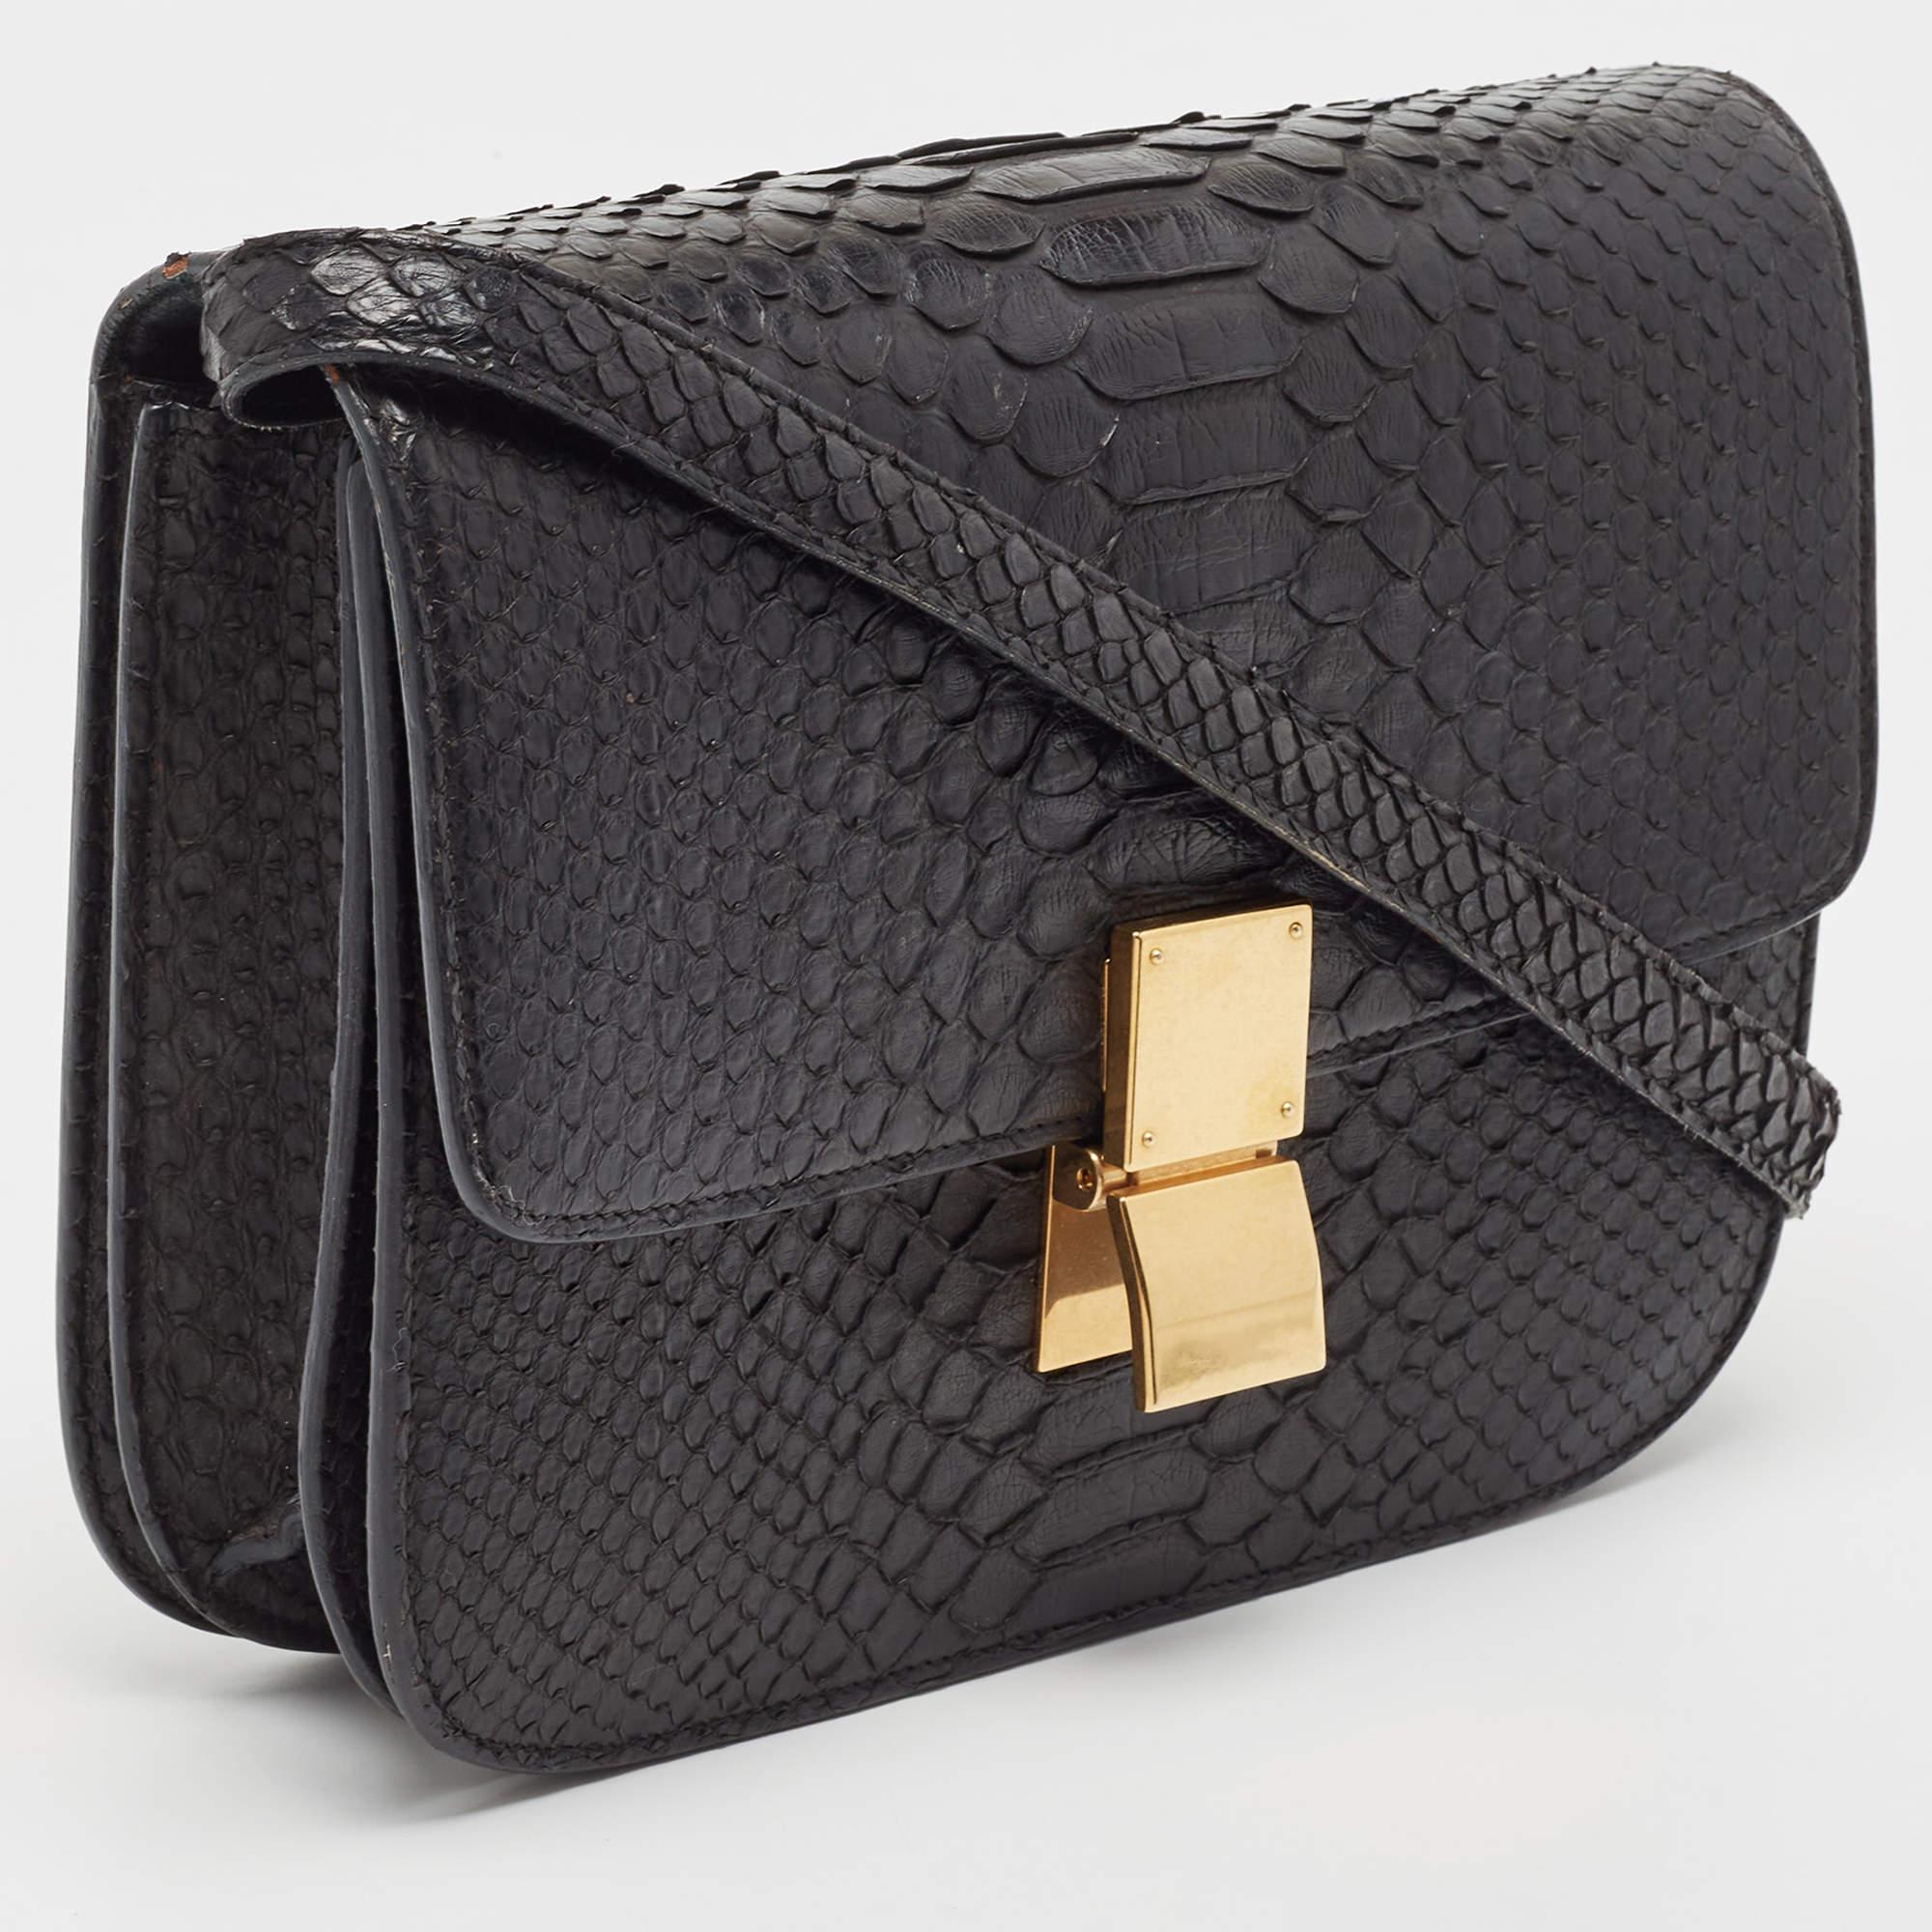 From the house of Celine comes this gorgeous Classic Box flap bag that will perfectly complement all your outfits. It has been luxuriously crafted from python and styled with a flap that opens to a well-sized leather interior. It is a timeless